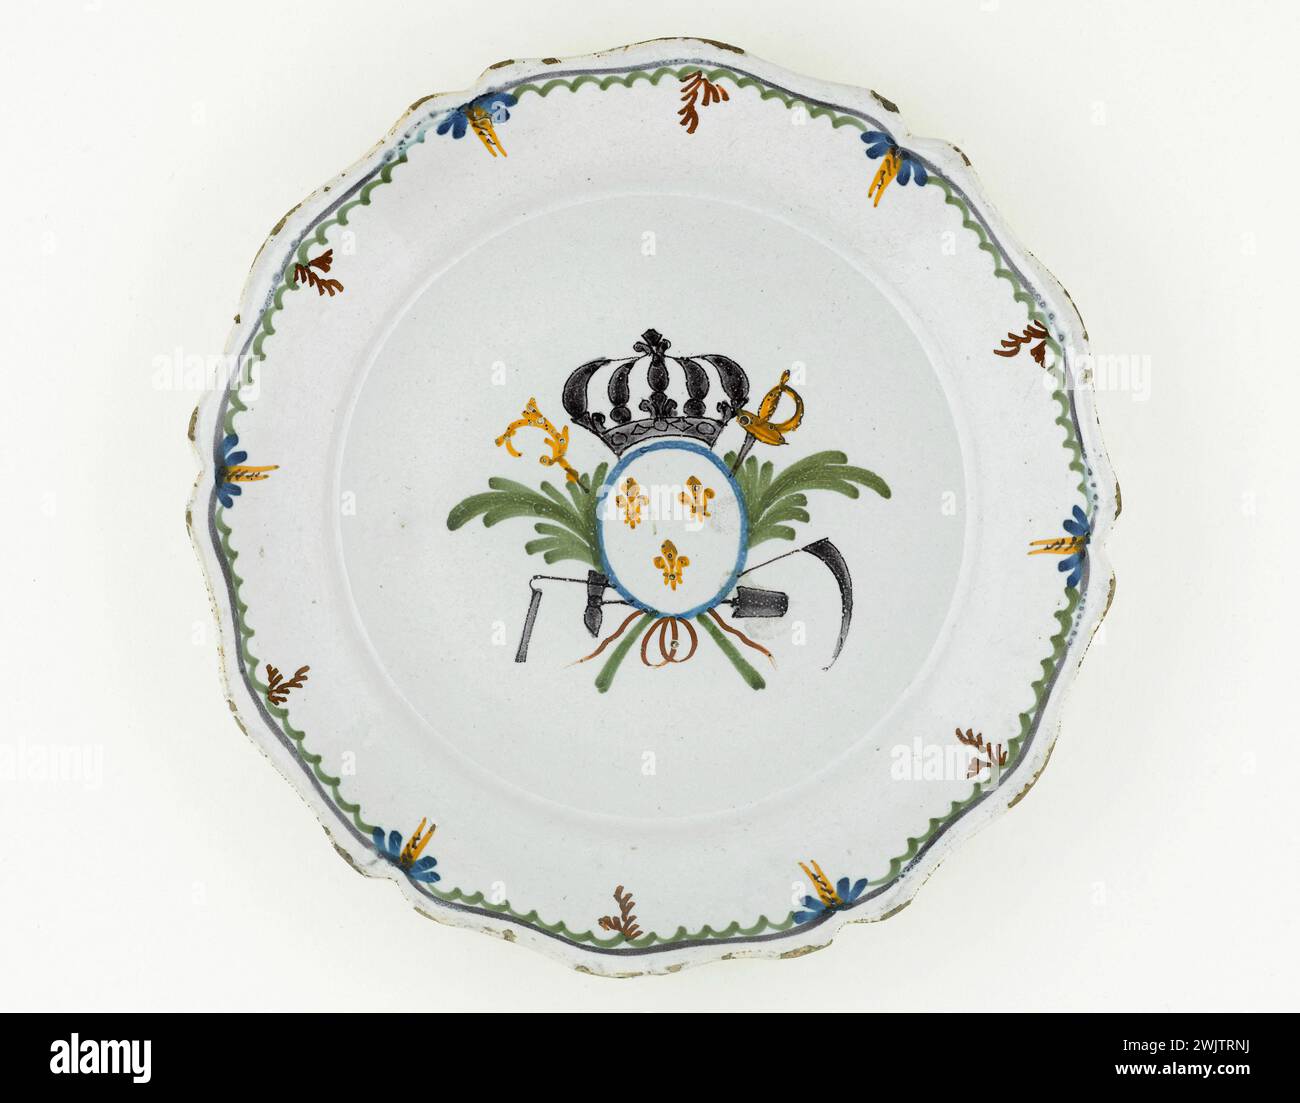 Anonymous. Plate. Earthenware. Around 1789. Paris, Carnavalet museum. 70955-51 Canon, Crown, Epee, Faience, Fauc, Lys, Decorative Pattern, Shovel, Revolutionary Periode, Crockery, plate Stock Photo